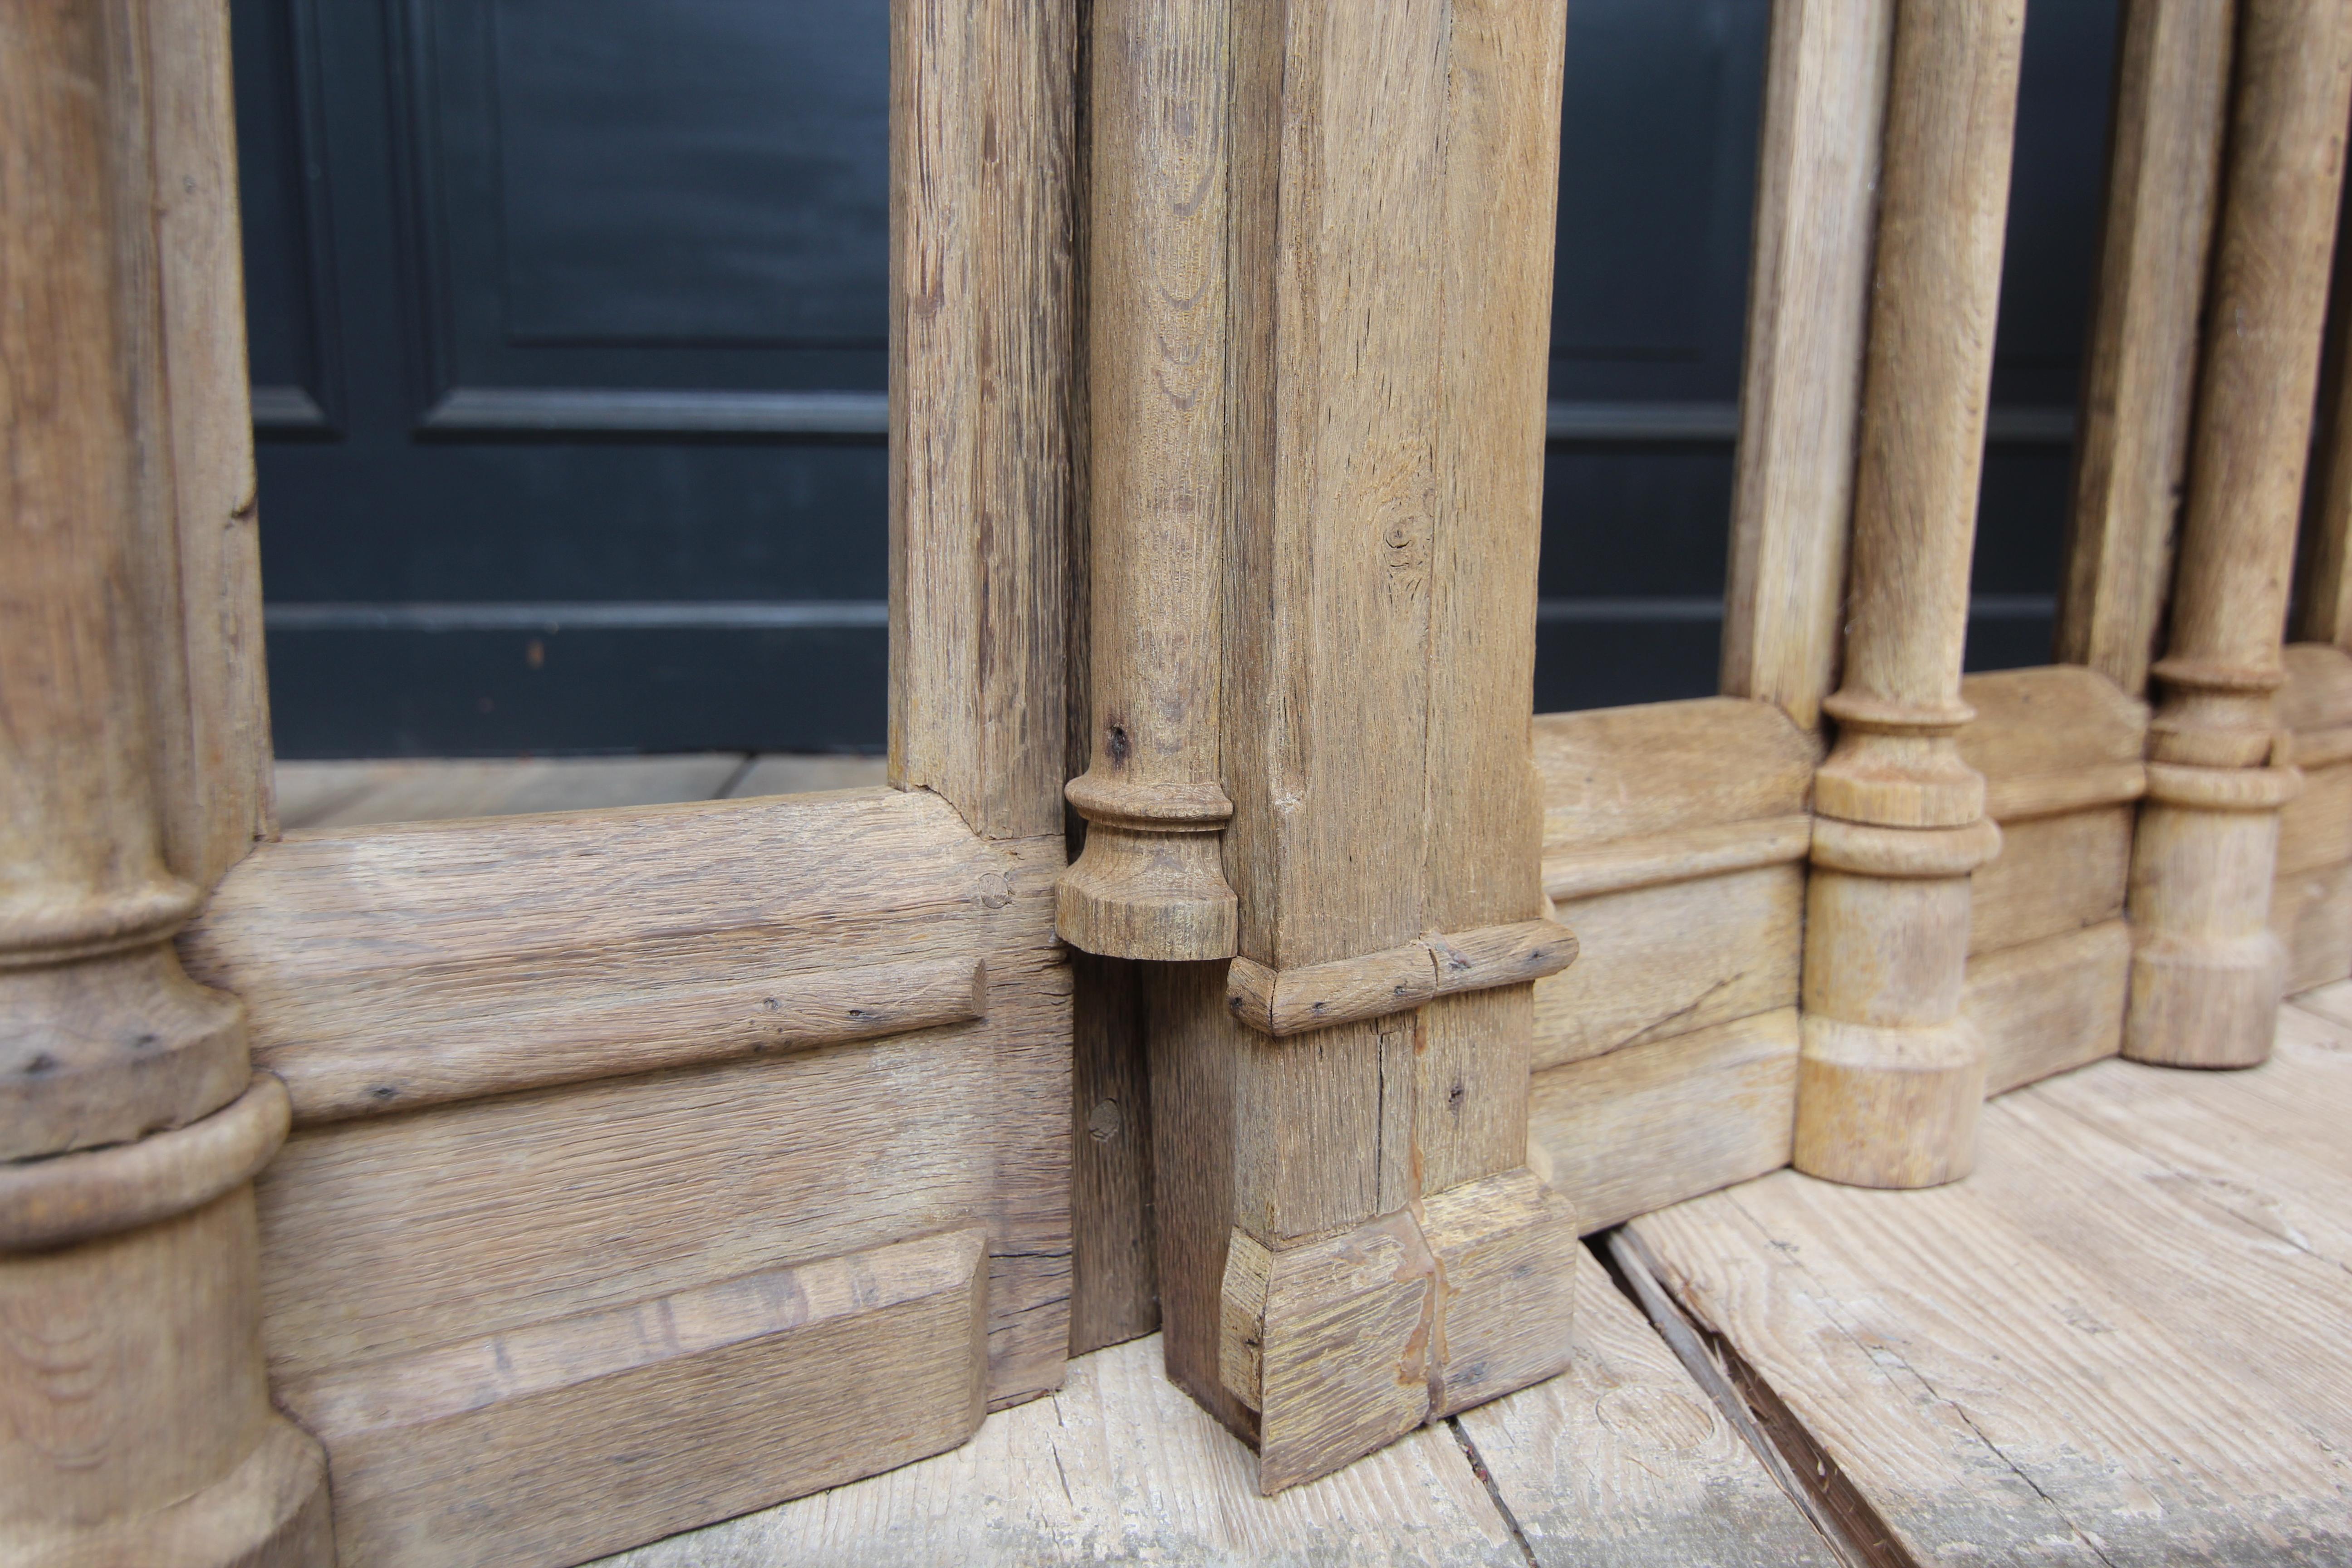 European Late 19th Century Gothic Revival Oak Balustrade with Entry